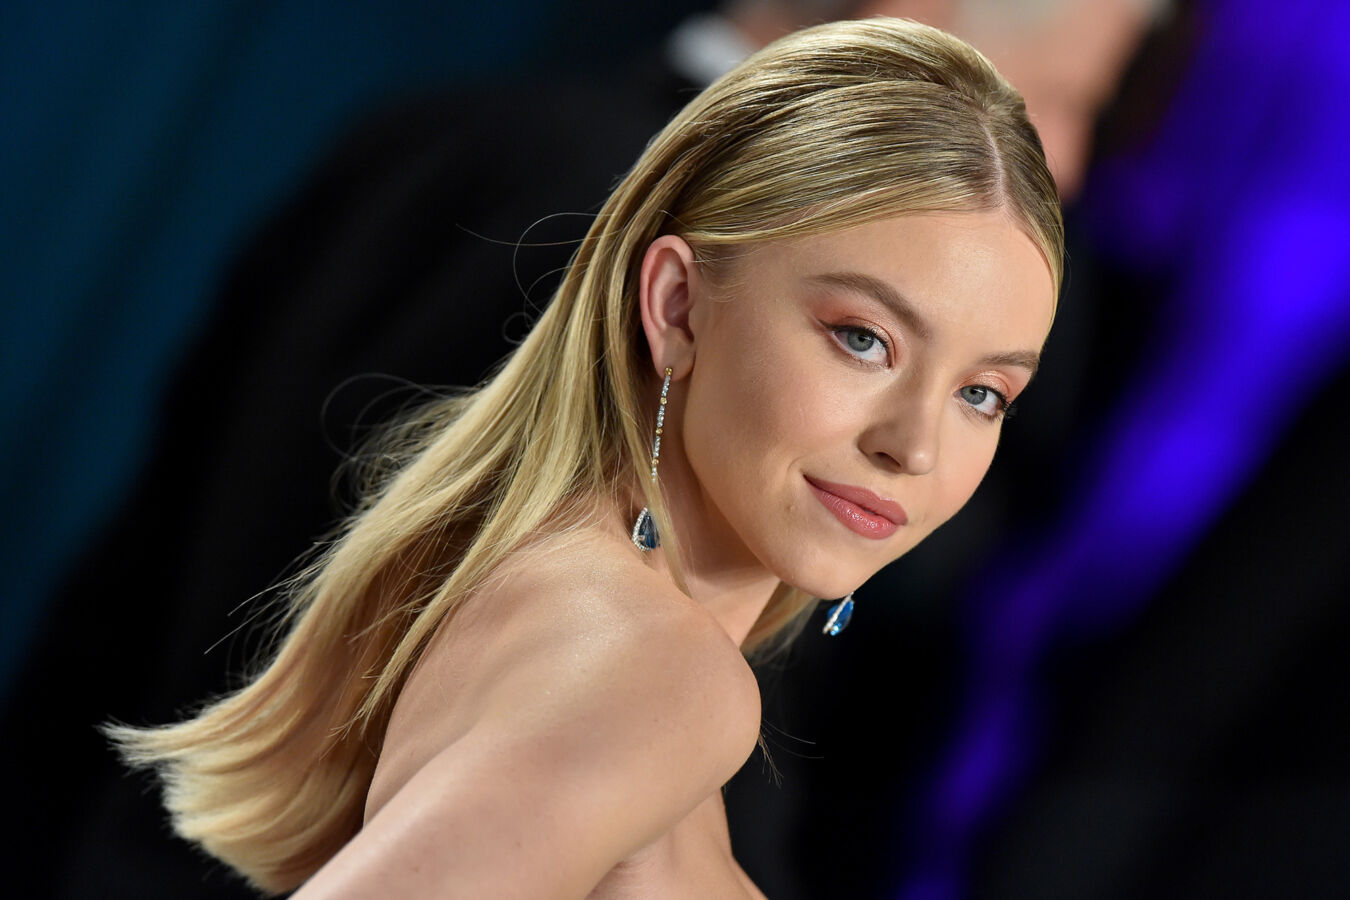 Marvel fans are loving Sydney Sweeney's first look in black Spider